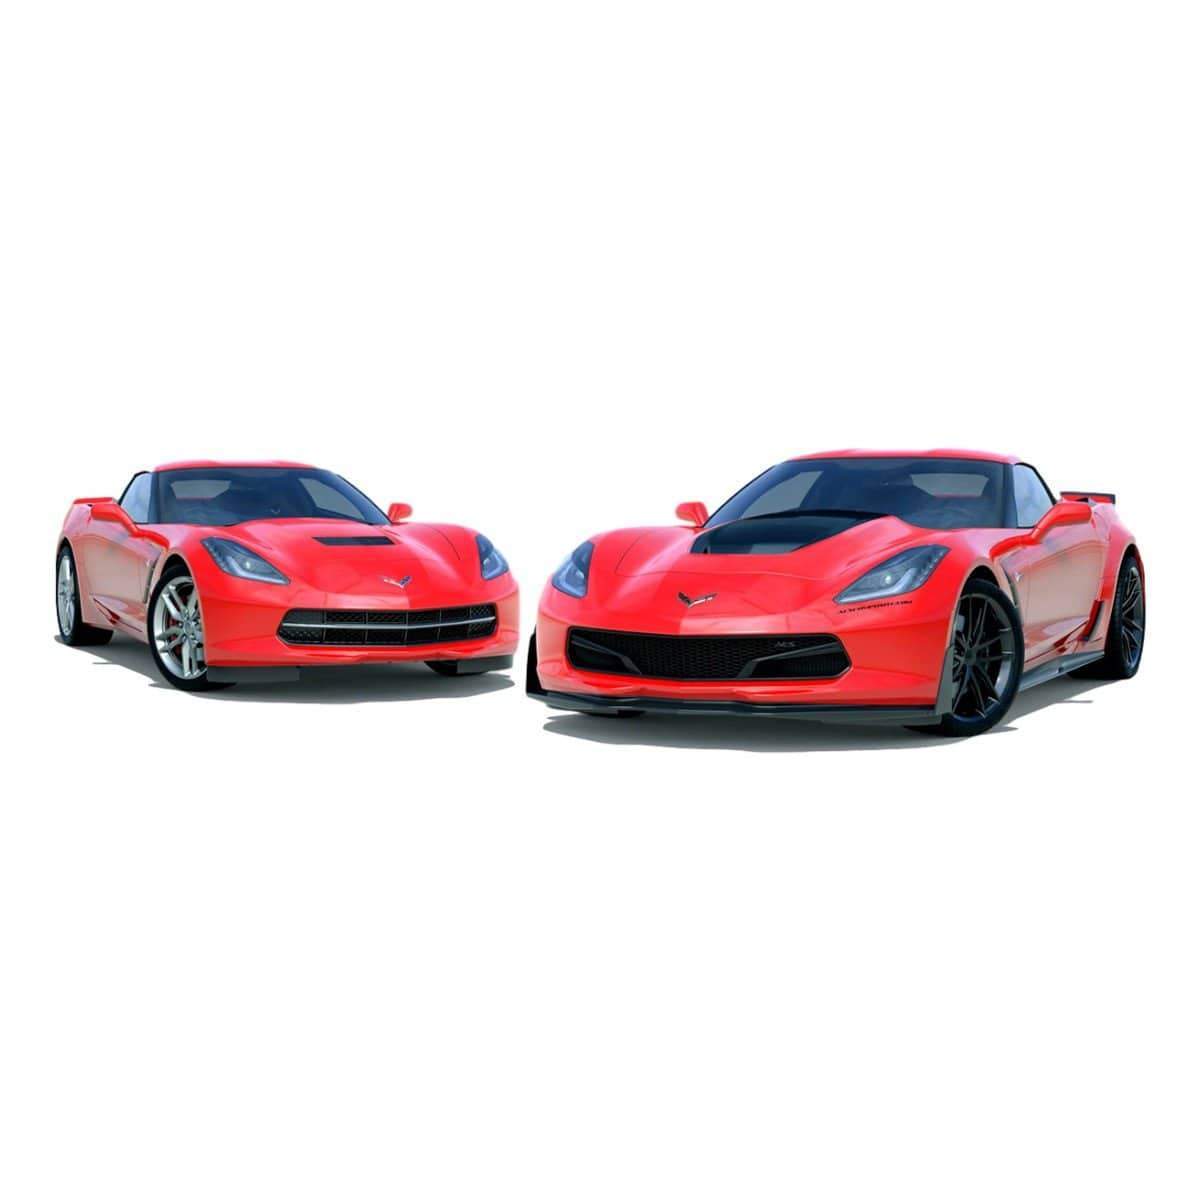 ACS Composite C7 Corvette Stingray Coupe Rear Widebody Conversion Kit with Z06 Scoop, SKU 45-4-073.